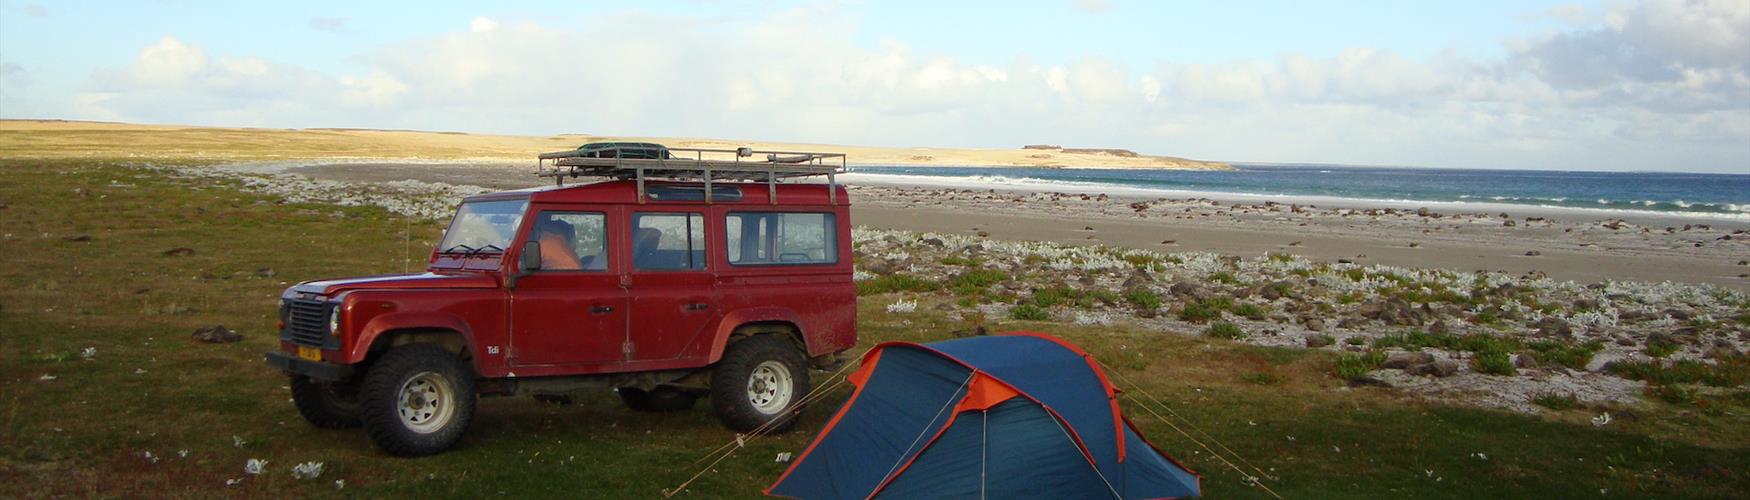 Wild camping in the Falkland Islands